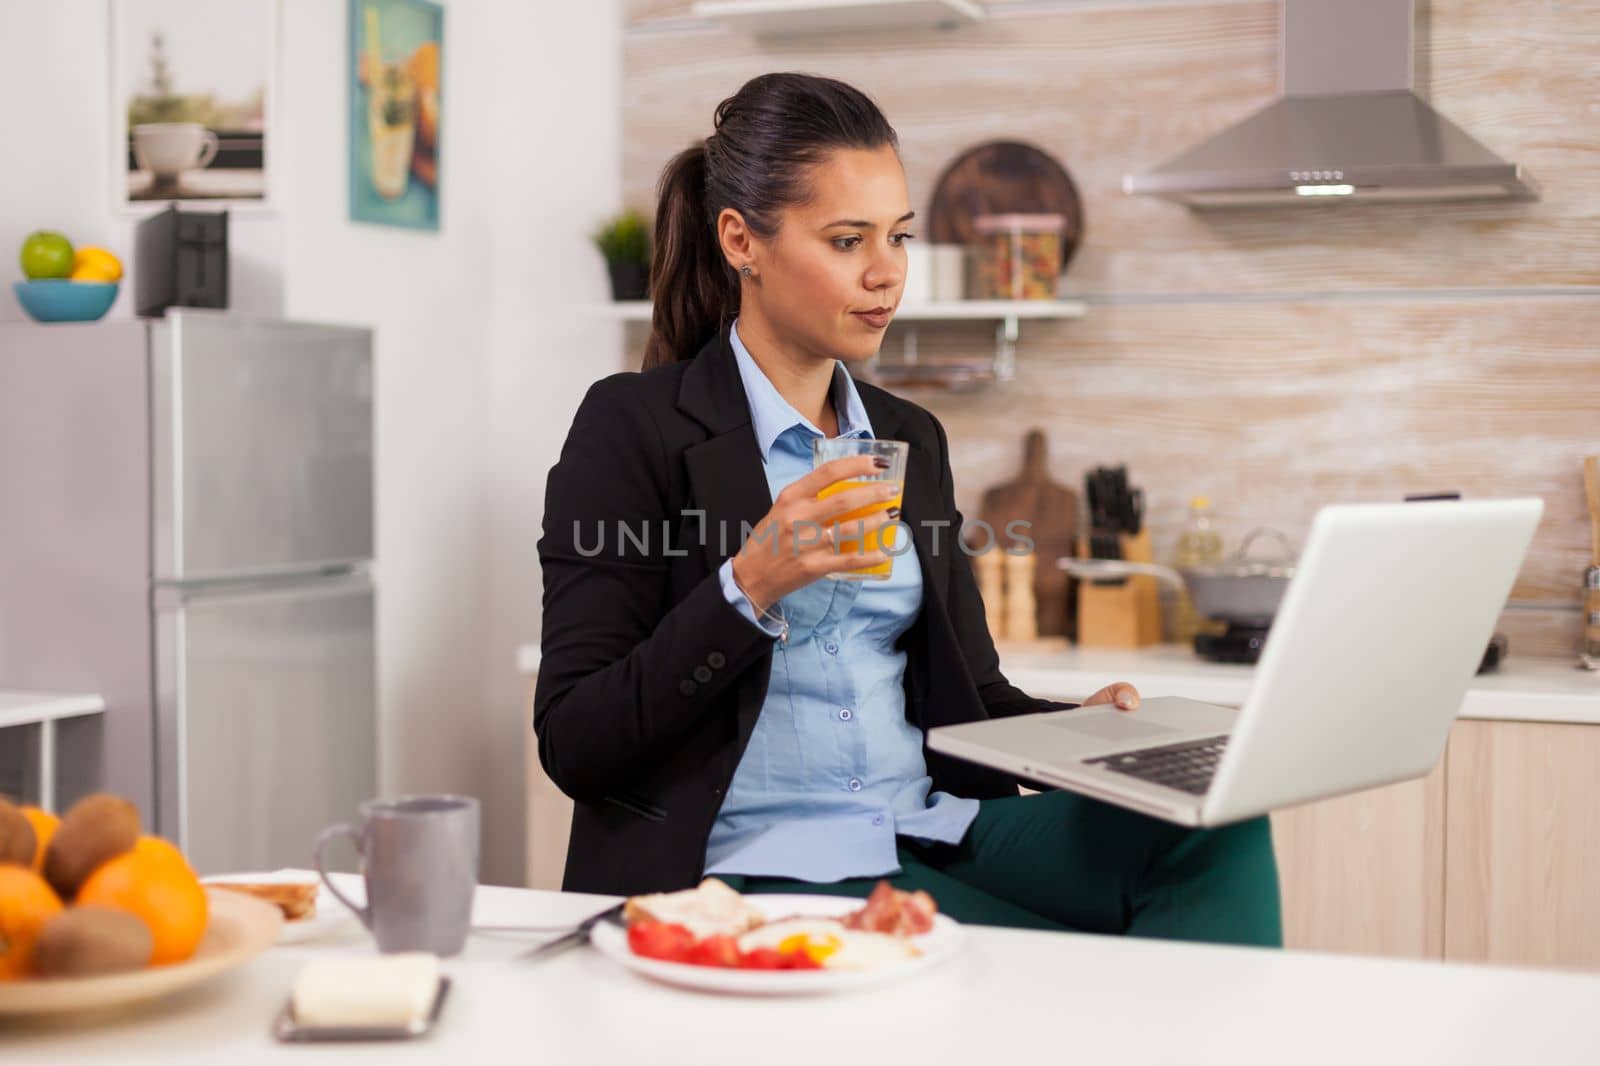 Business woman taking a break and relaxing watching a video clip, drinking orange juice. Young freelancer in the kitchen talking on a video call with her colleagues from the office, using modern internet technology